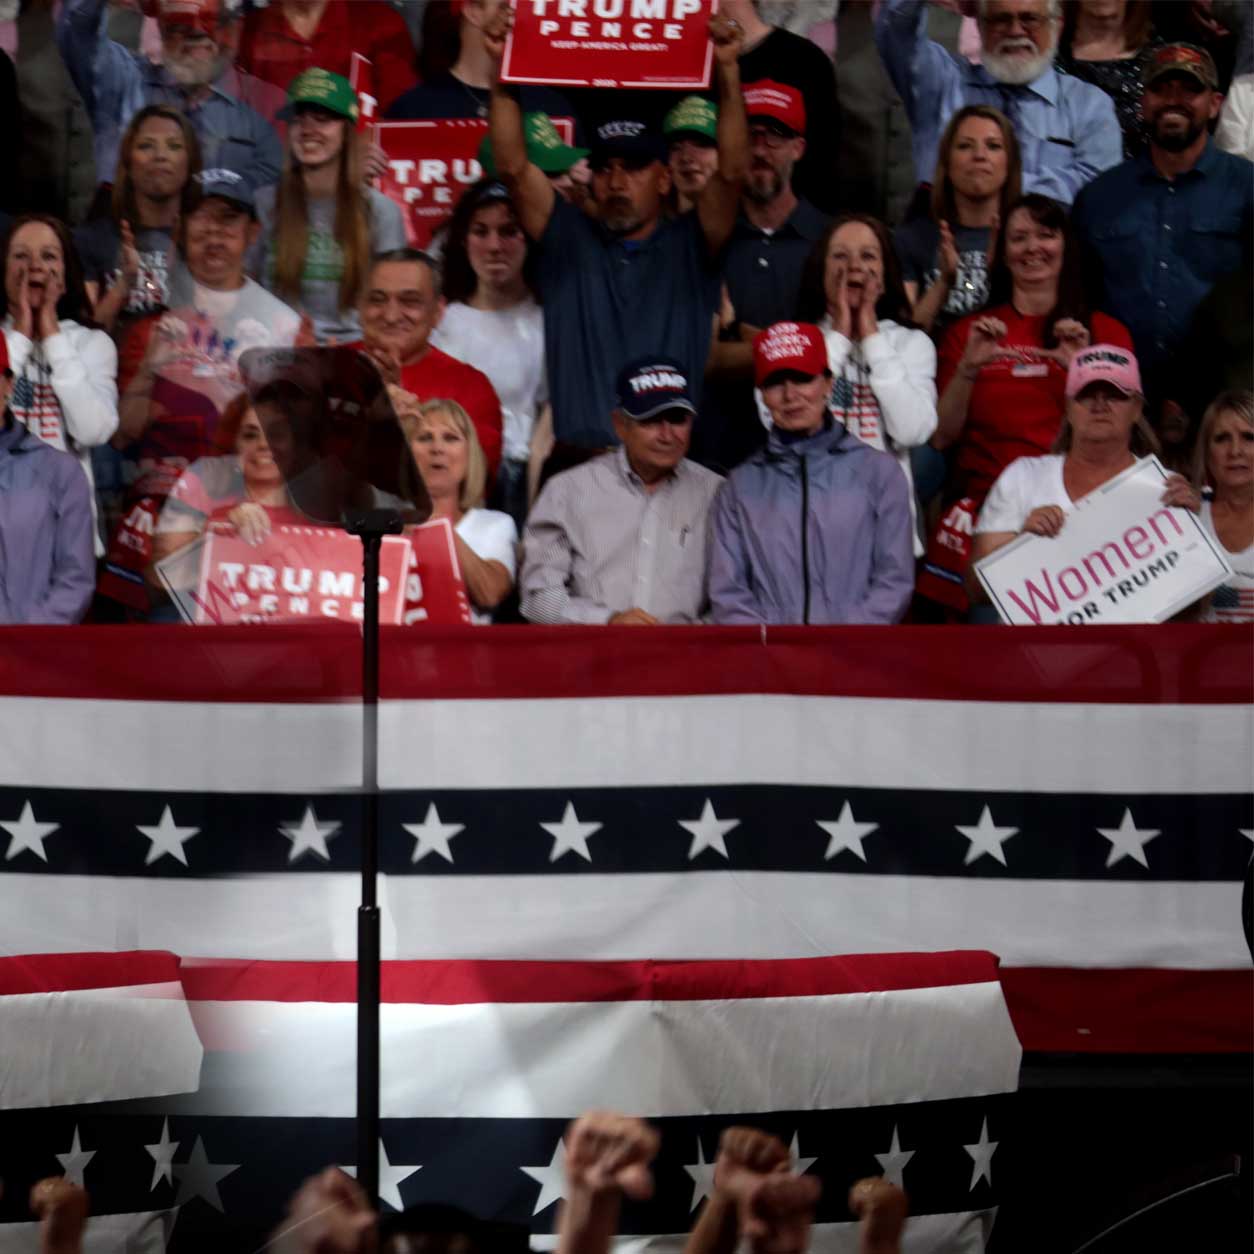 Legal Votes Only Trump Election 2020 Rally Crowd FEATURED